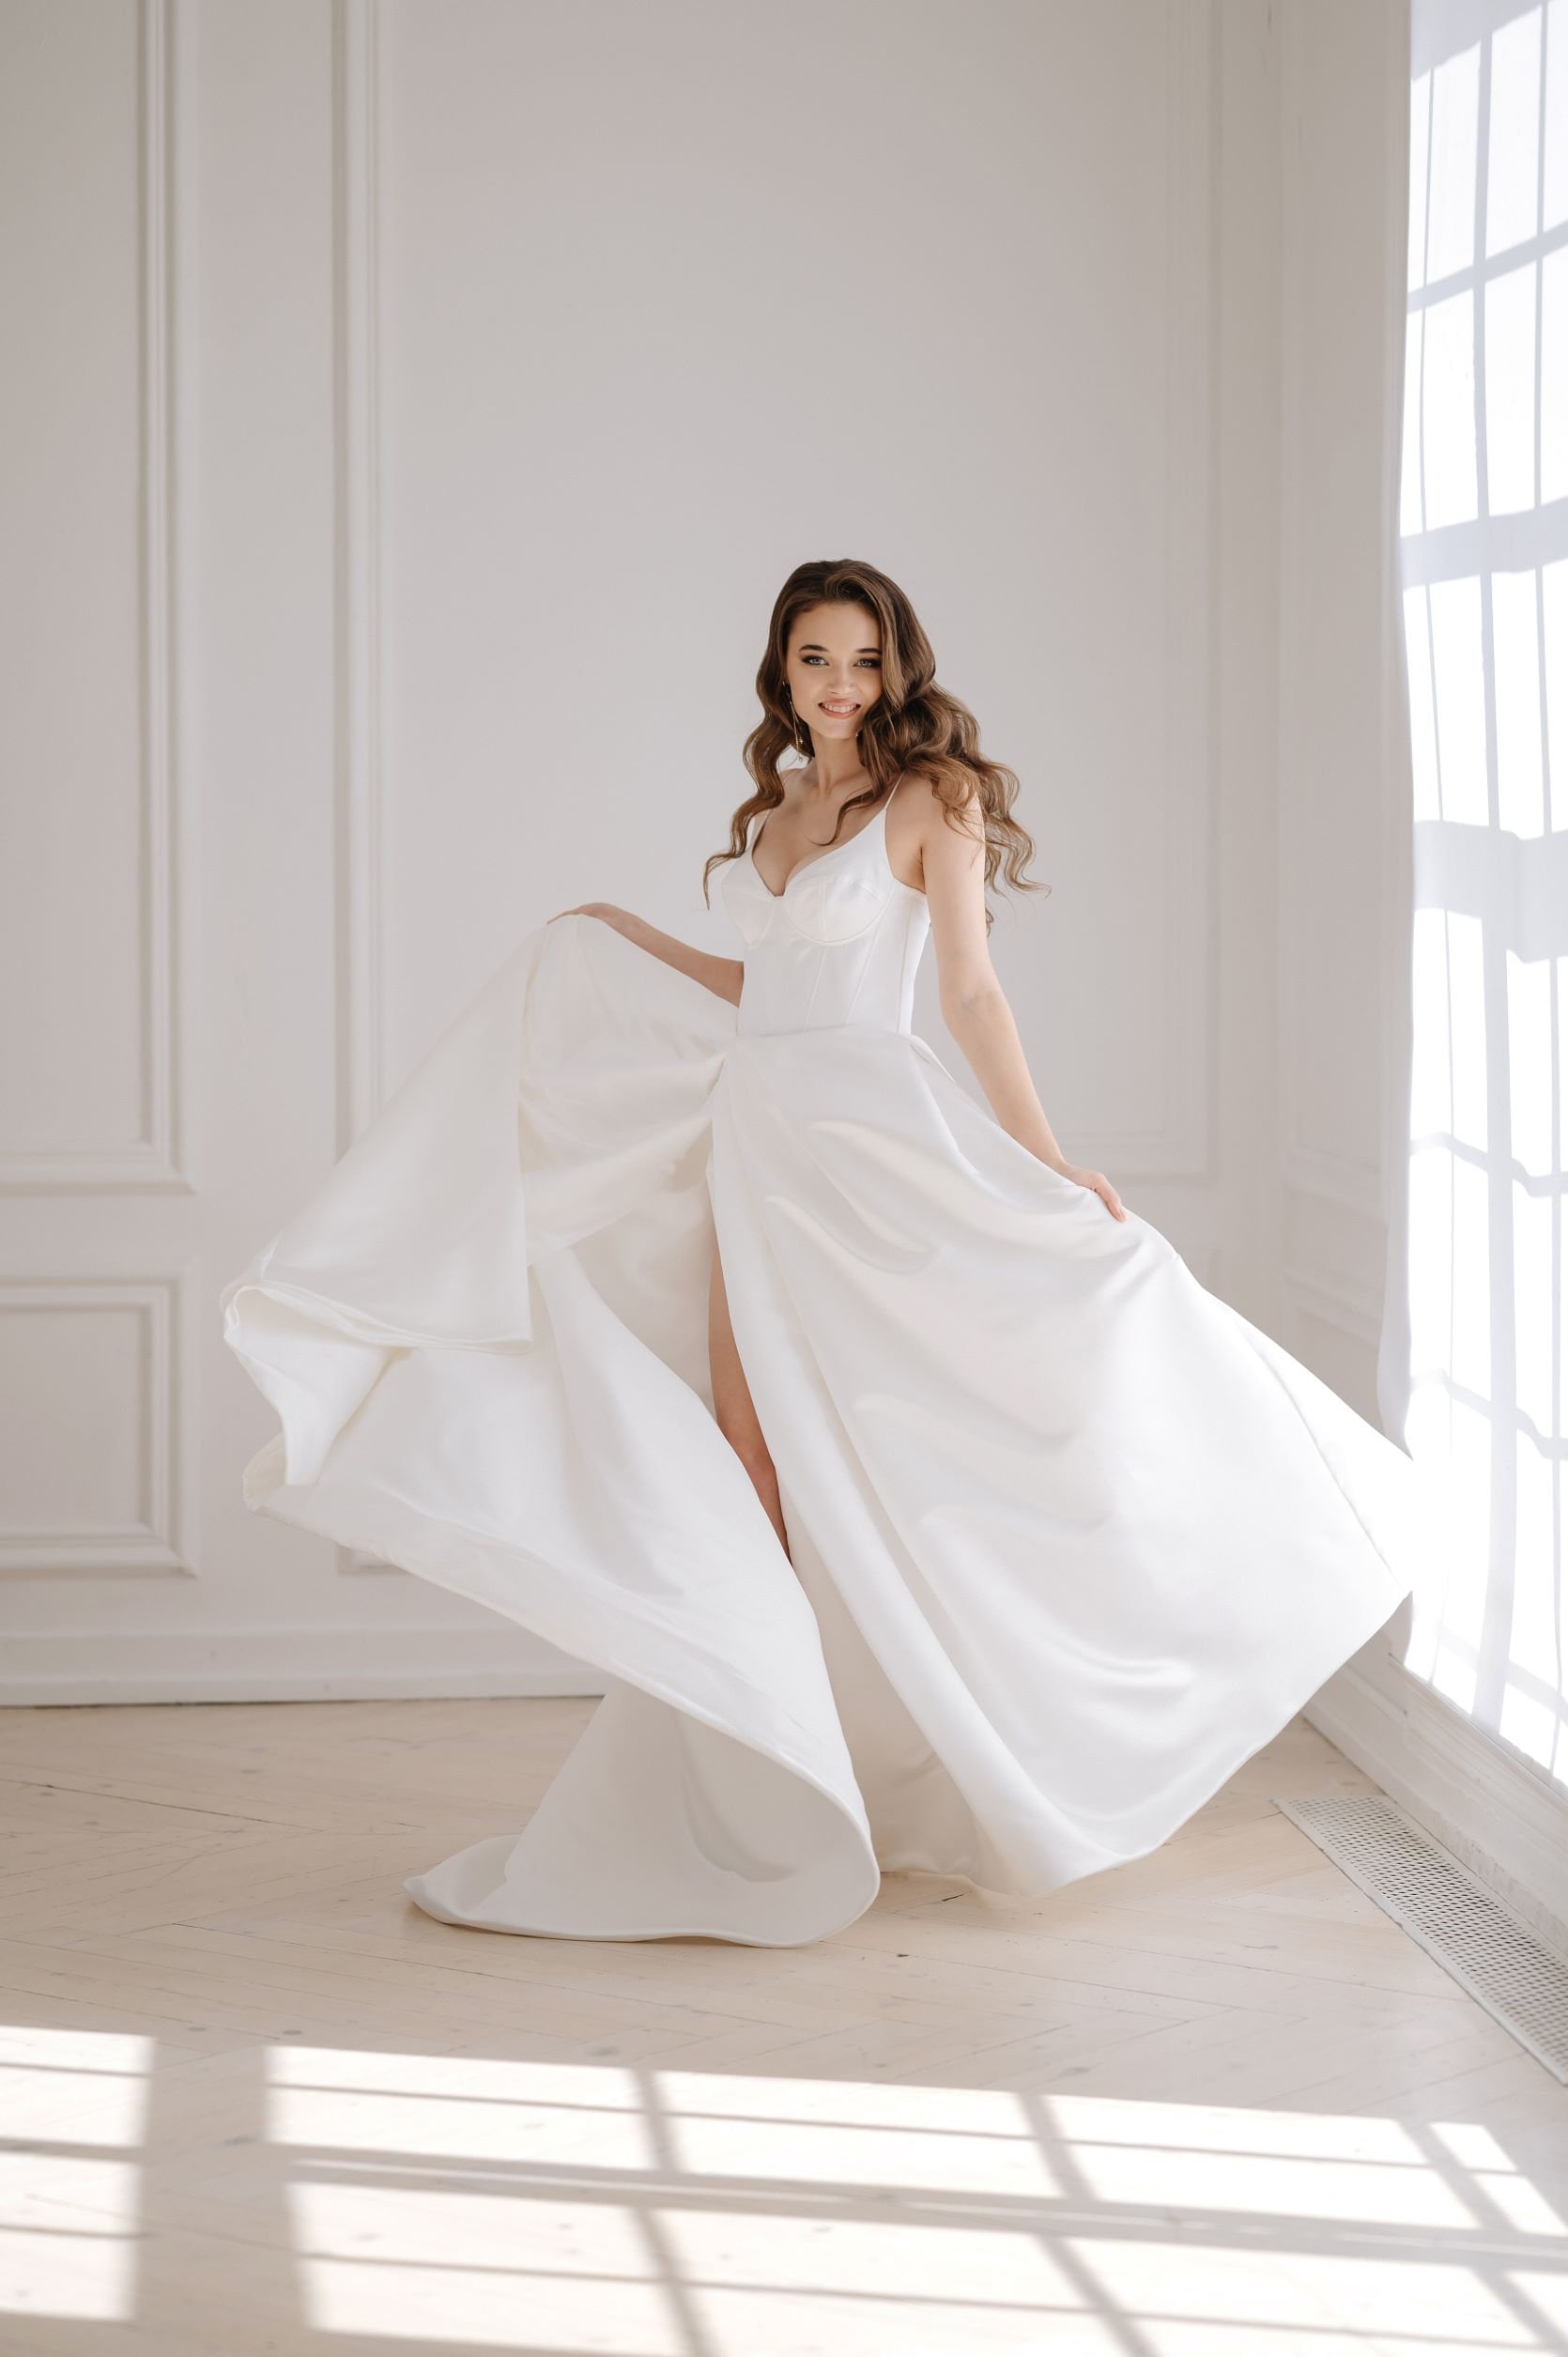 2022 Satin Wedding Dress with Off-the-shoulder Sleeves